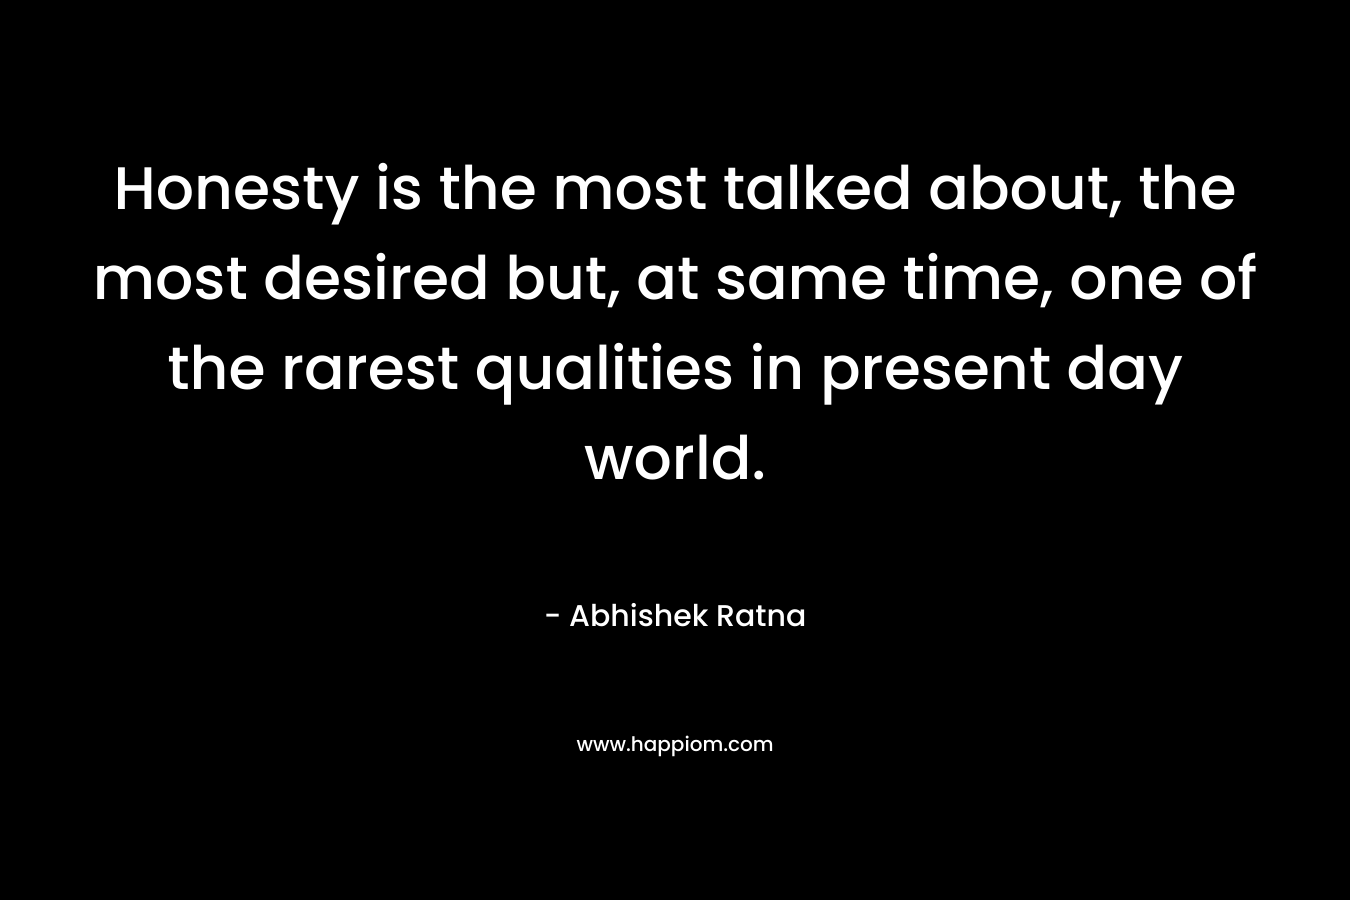 Honesty is the most talked about, the most desired but, at same time, one of the rarest qualities in present day world. – Abhishek Ratna